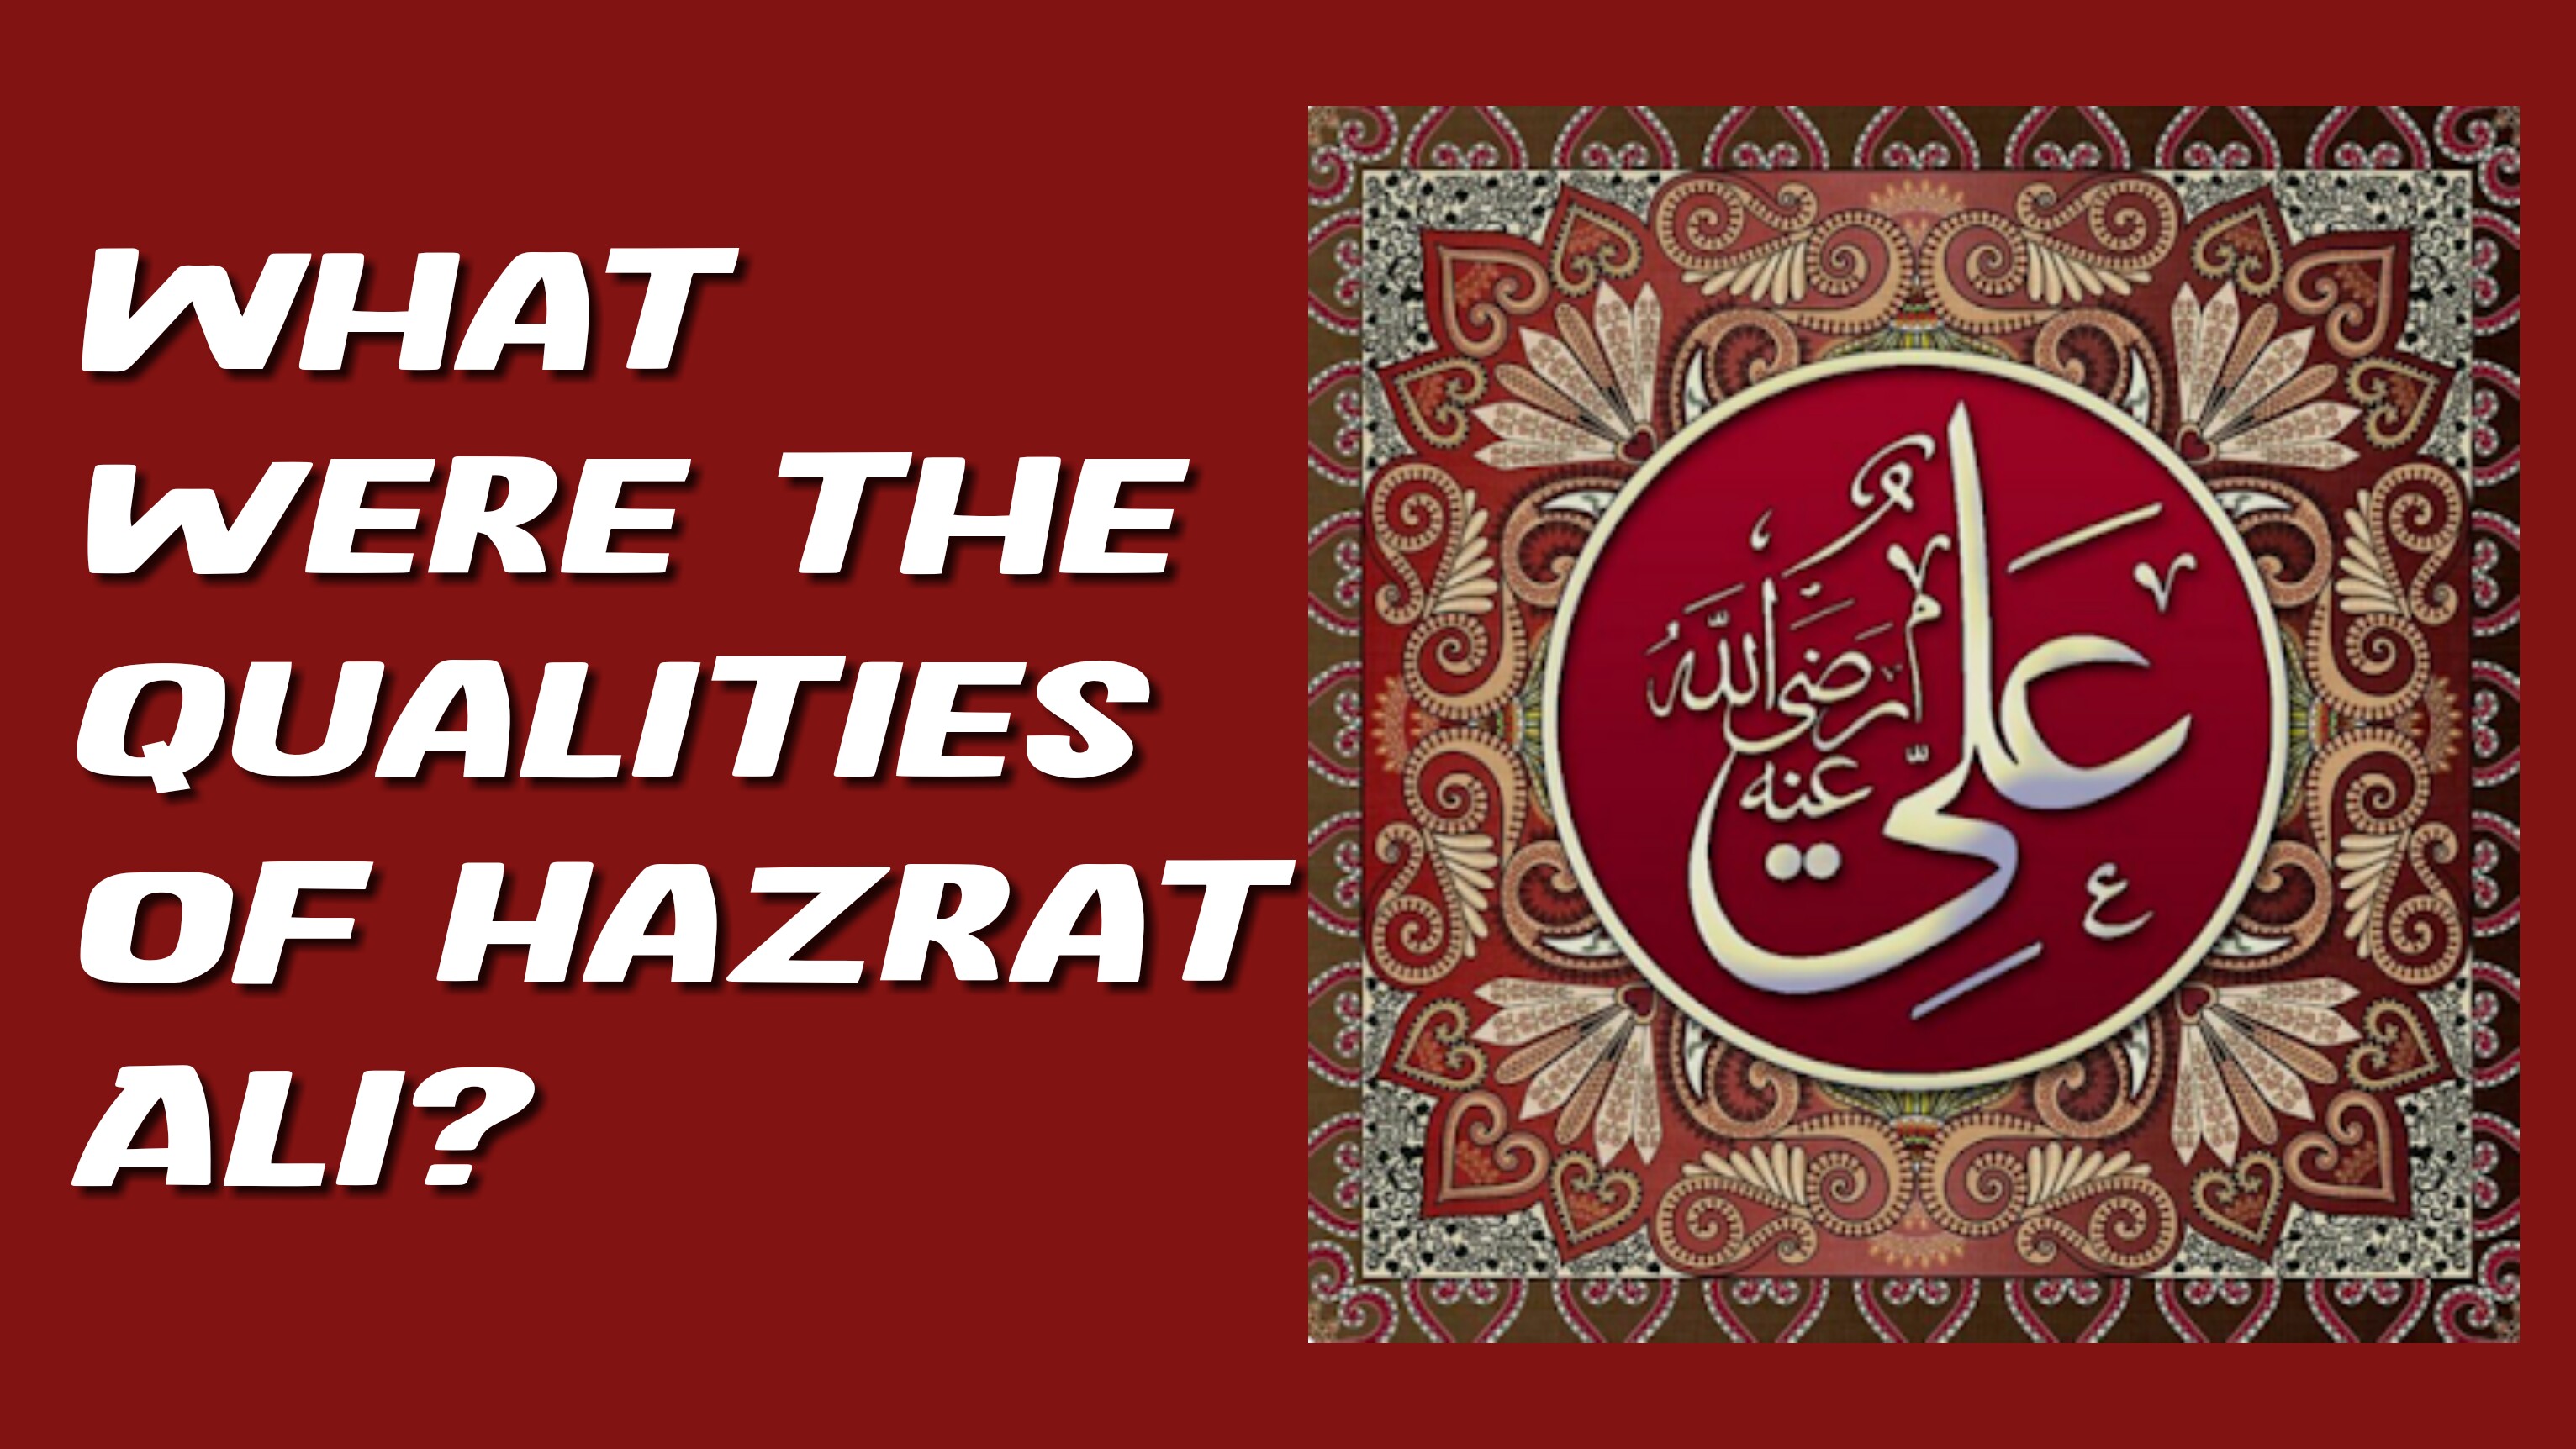 What were the qualities of Hazrat Ali?